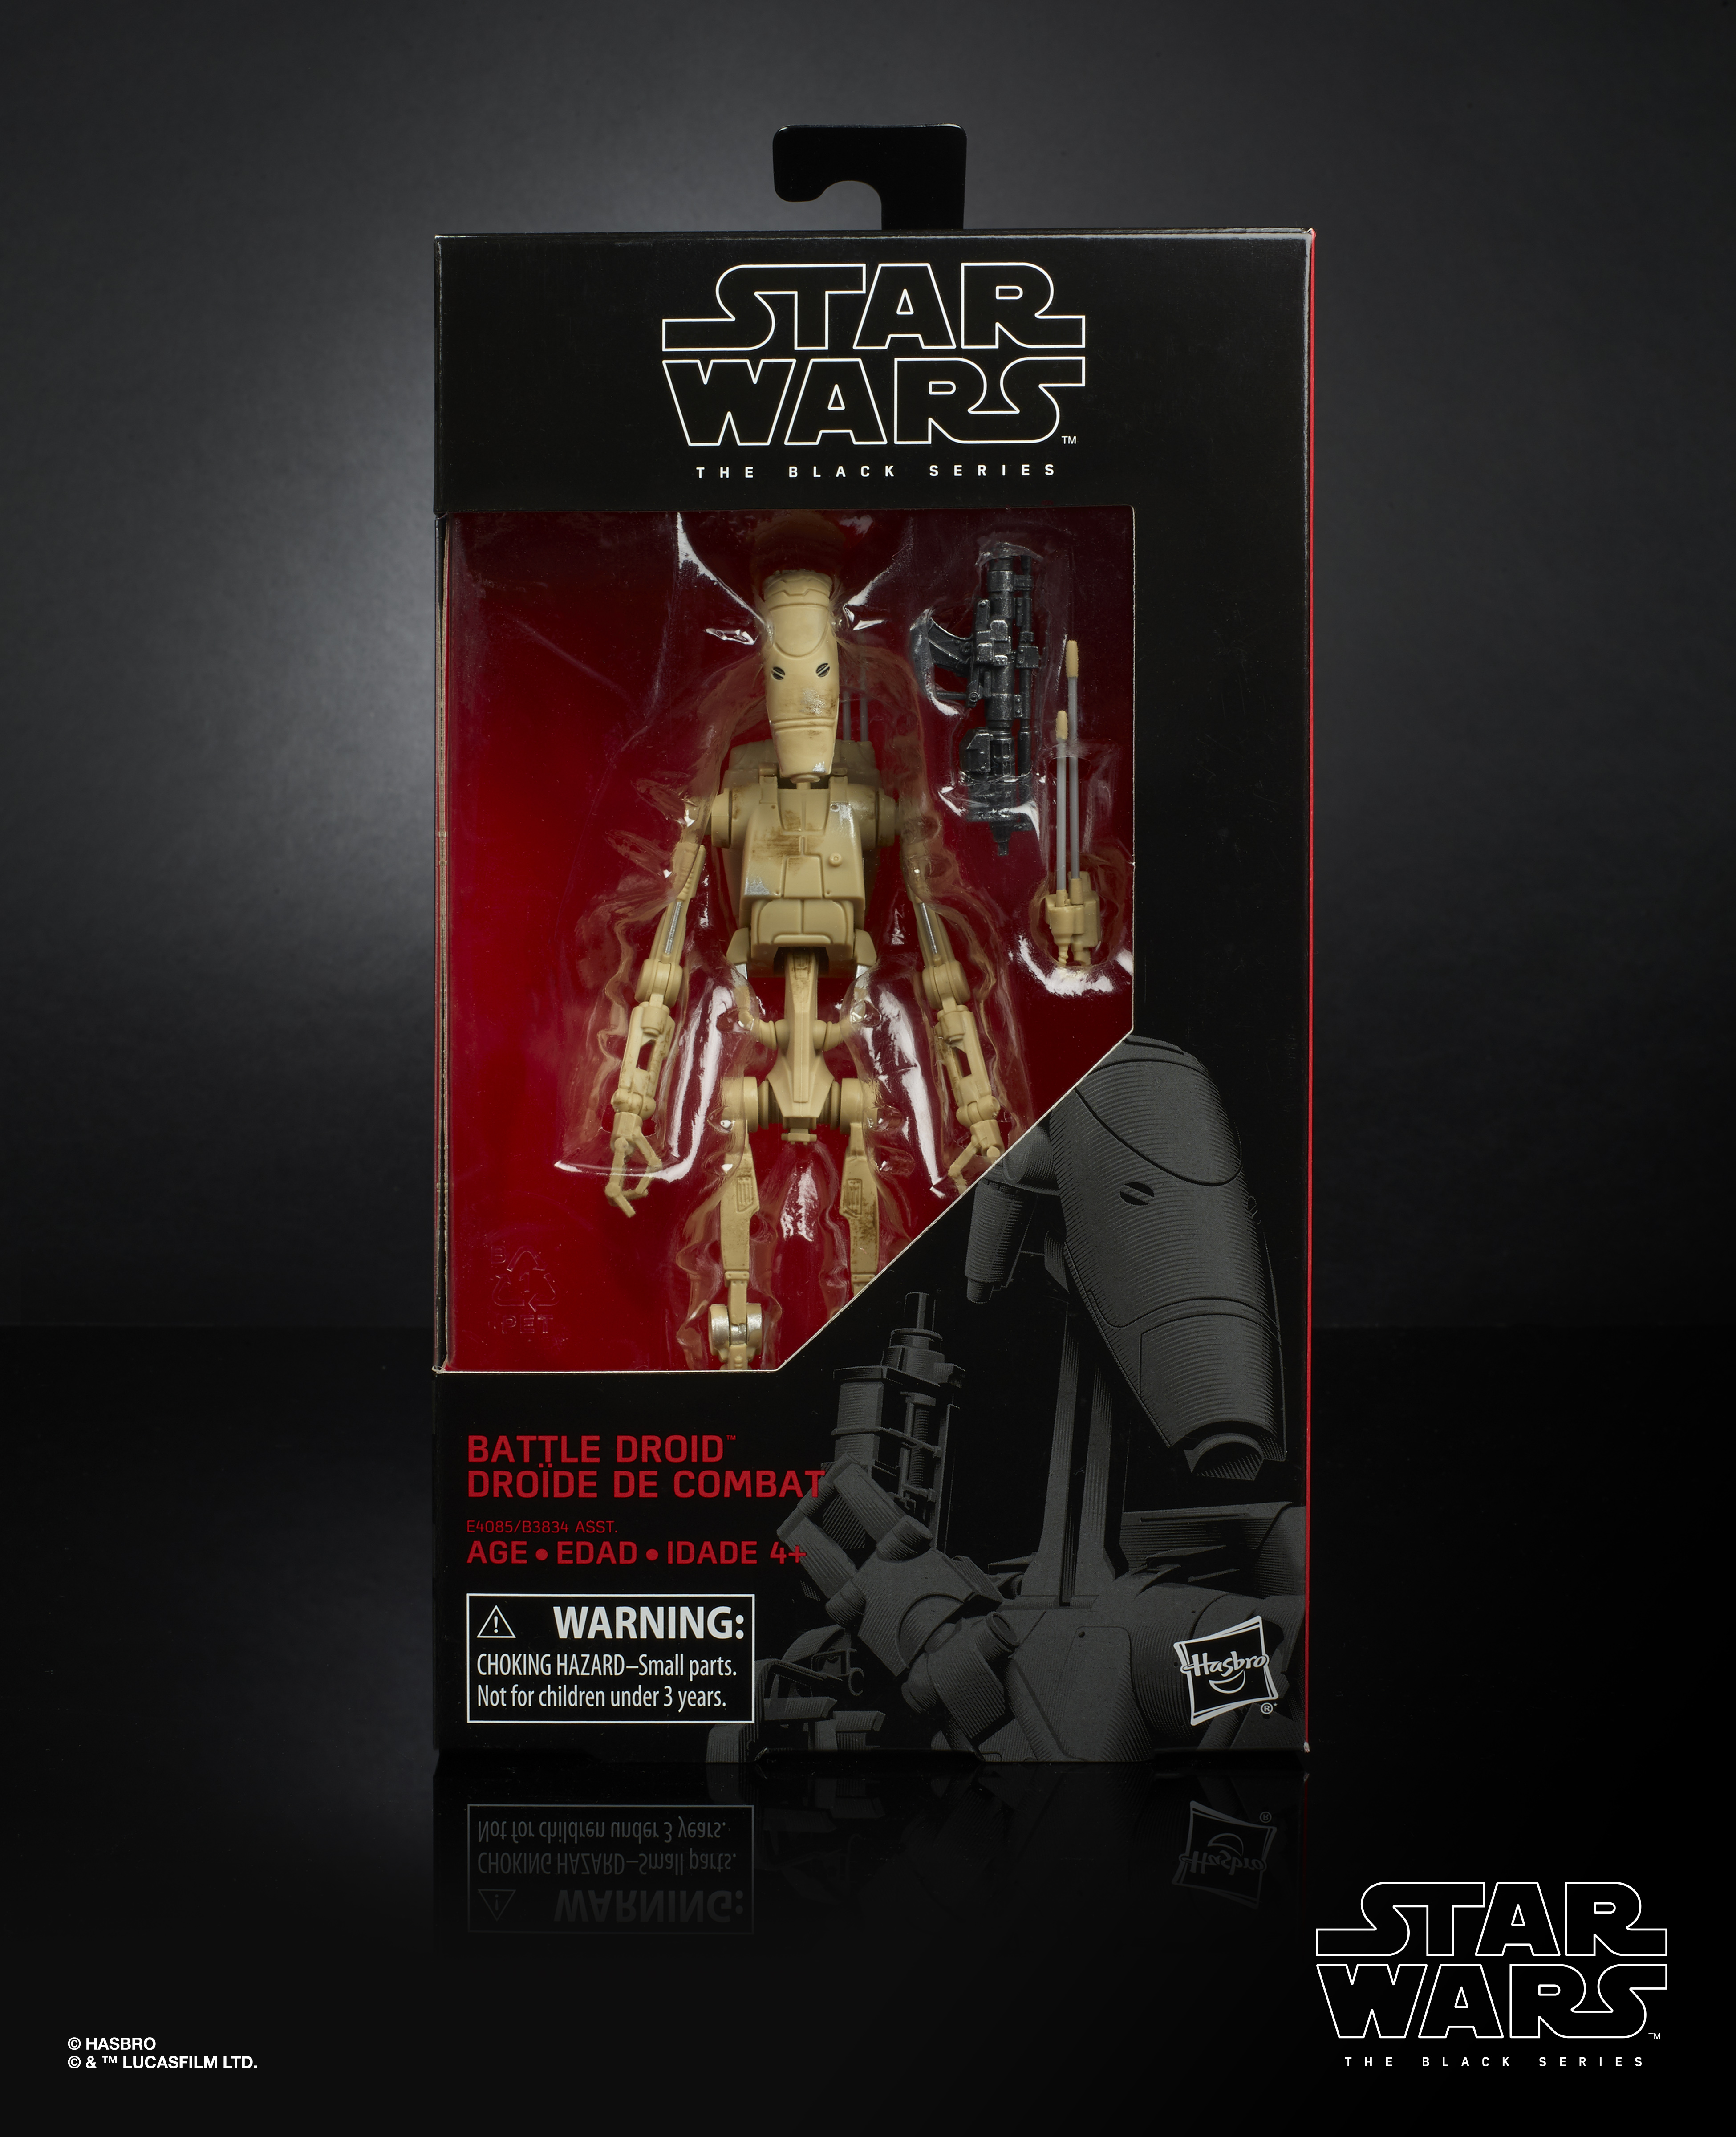 Star Wars The Black Series Battle Droid in pck